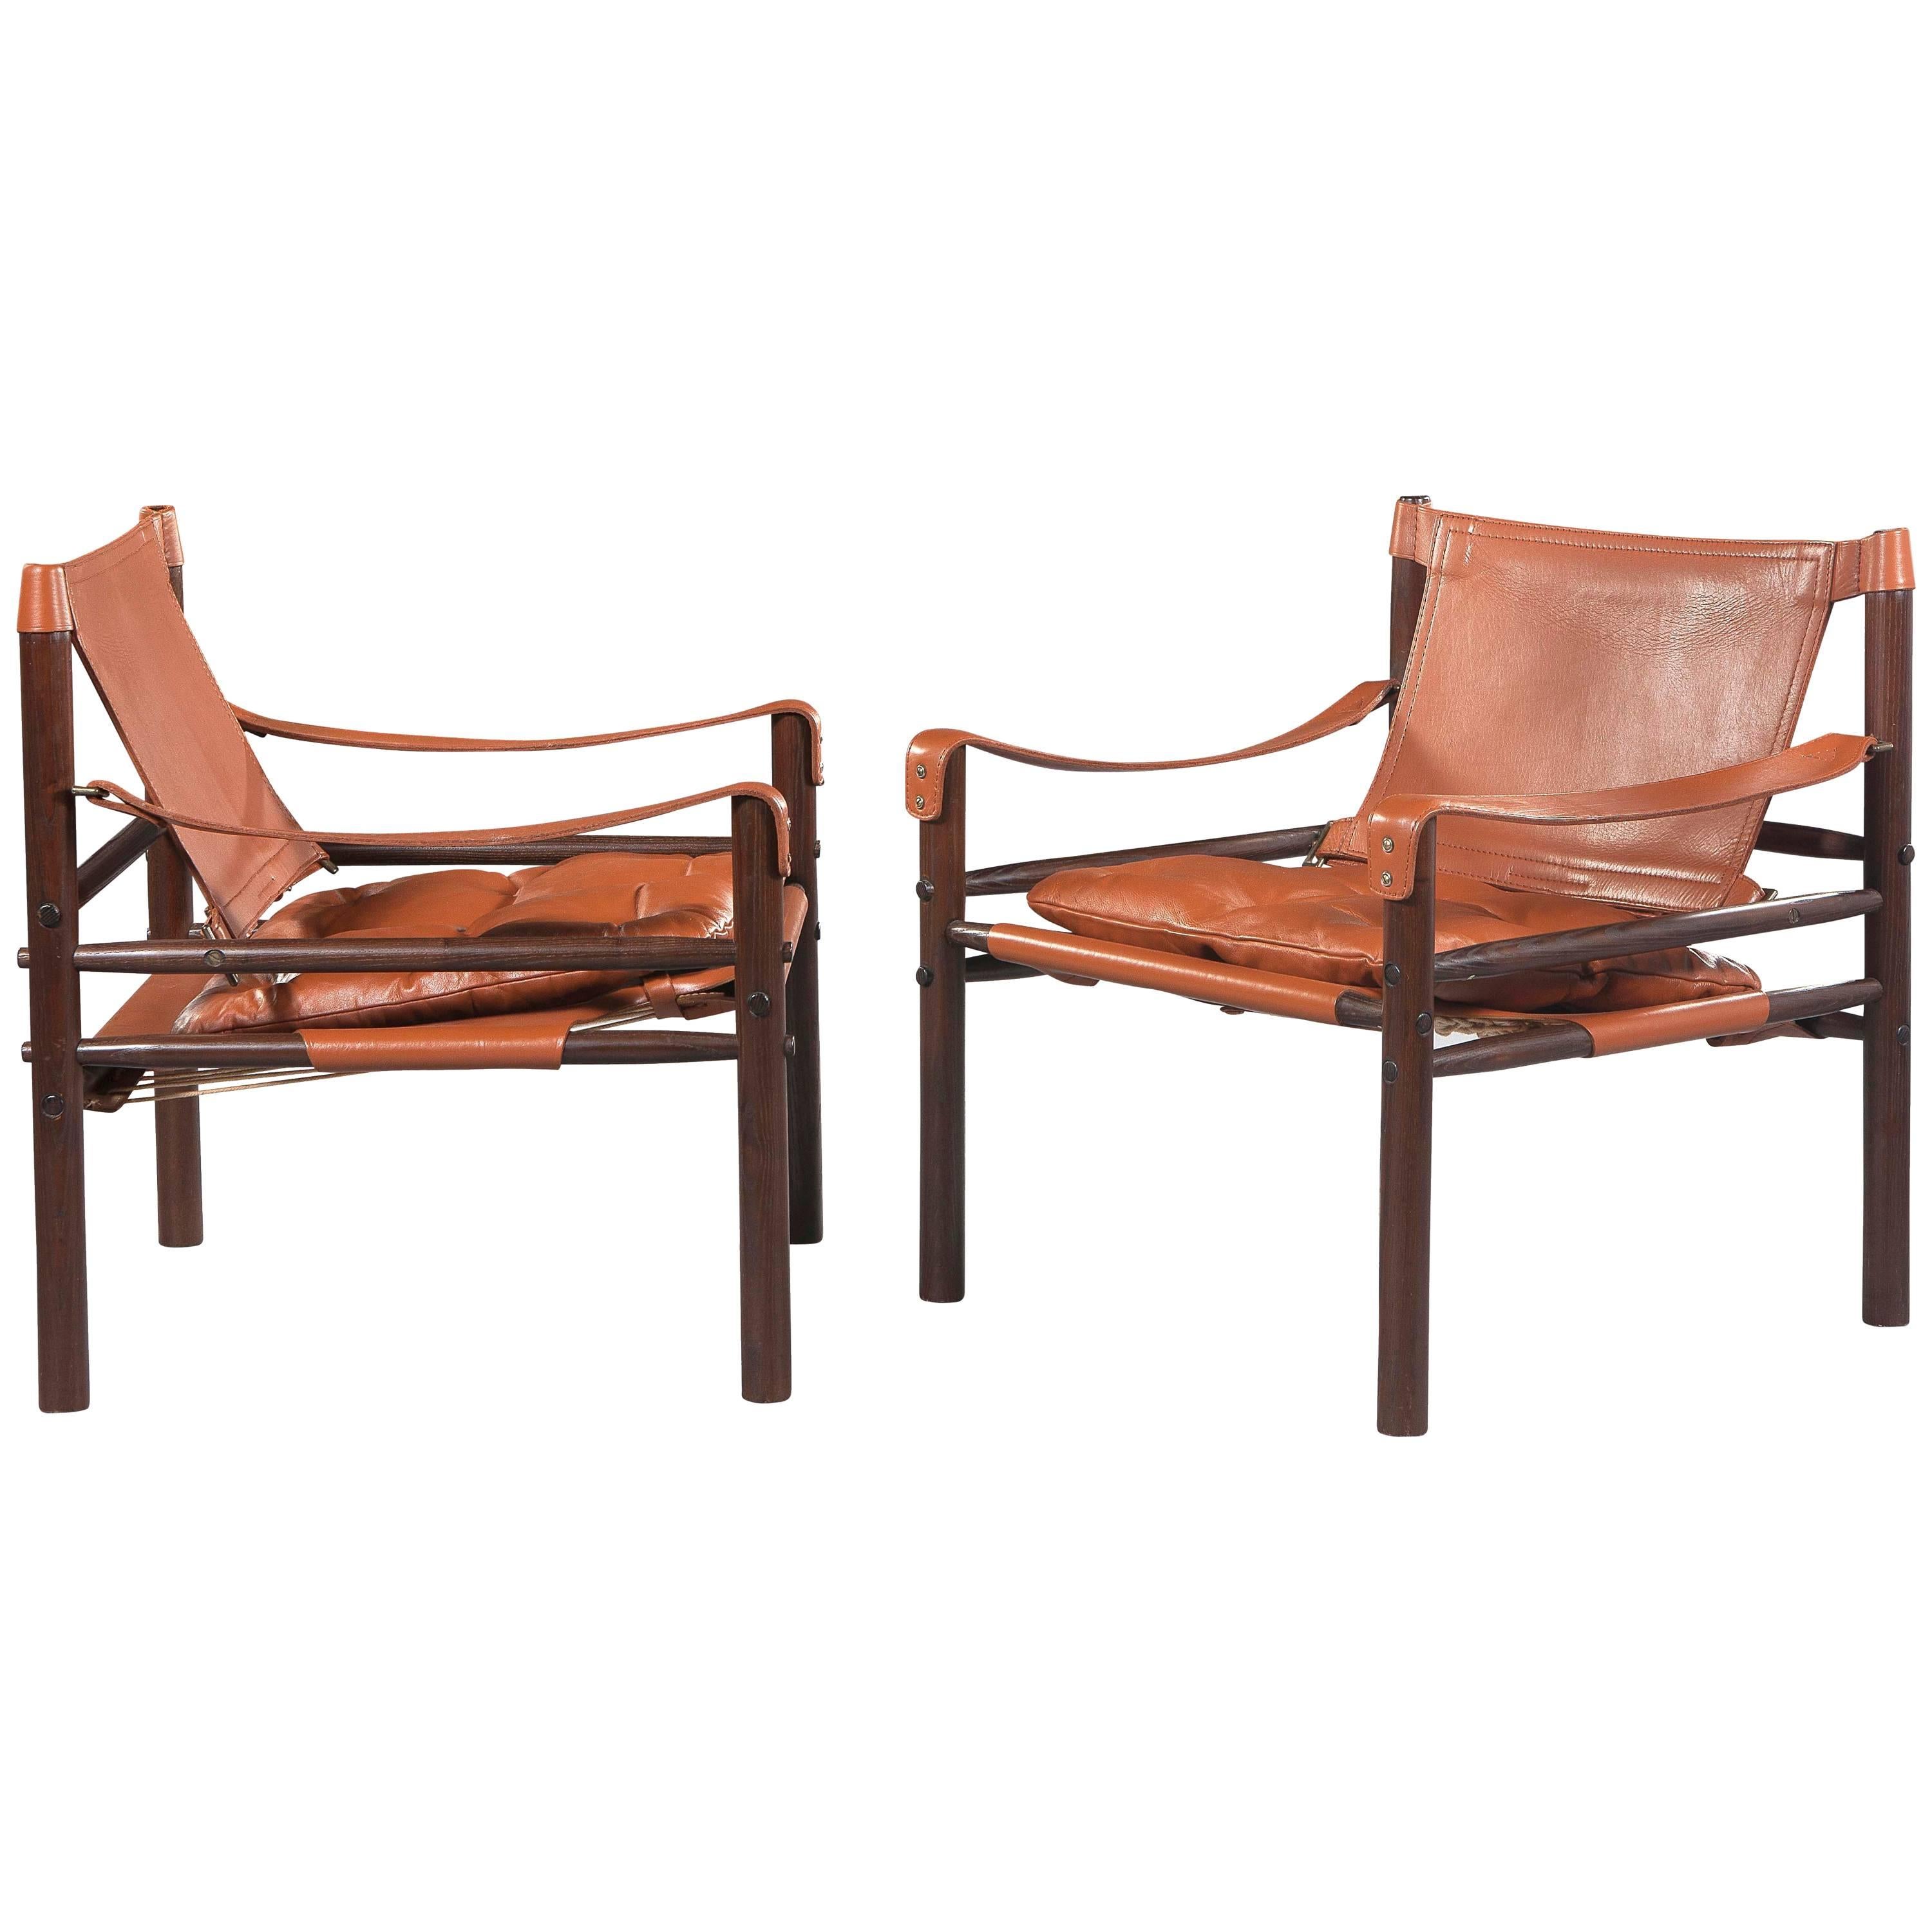 Great Pair of  "Sirocco" Safari Chairs by Arne Norell